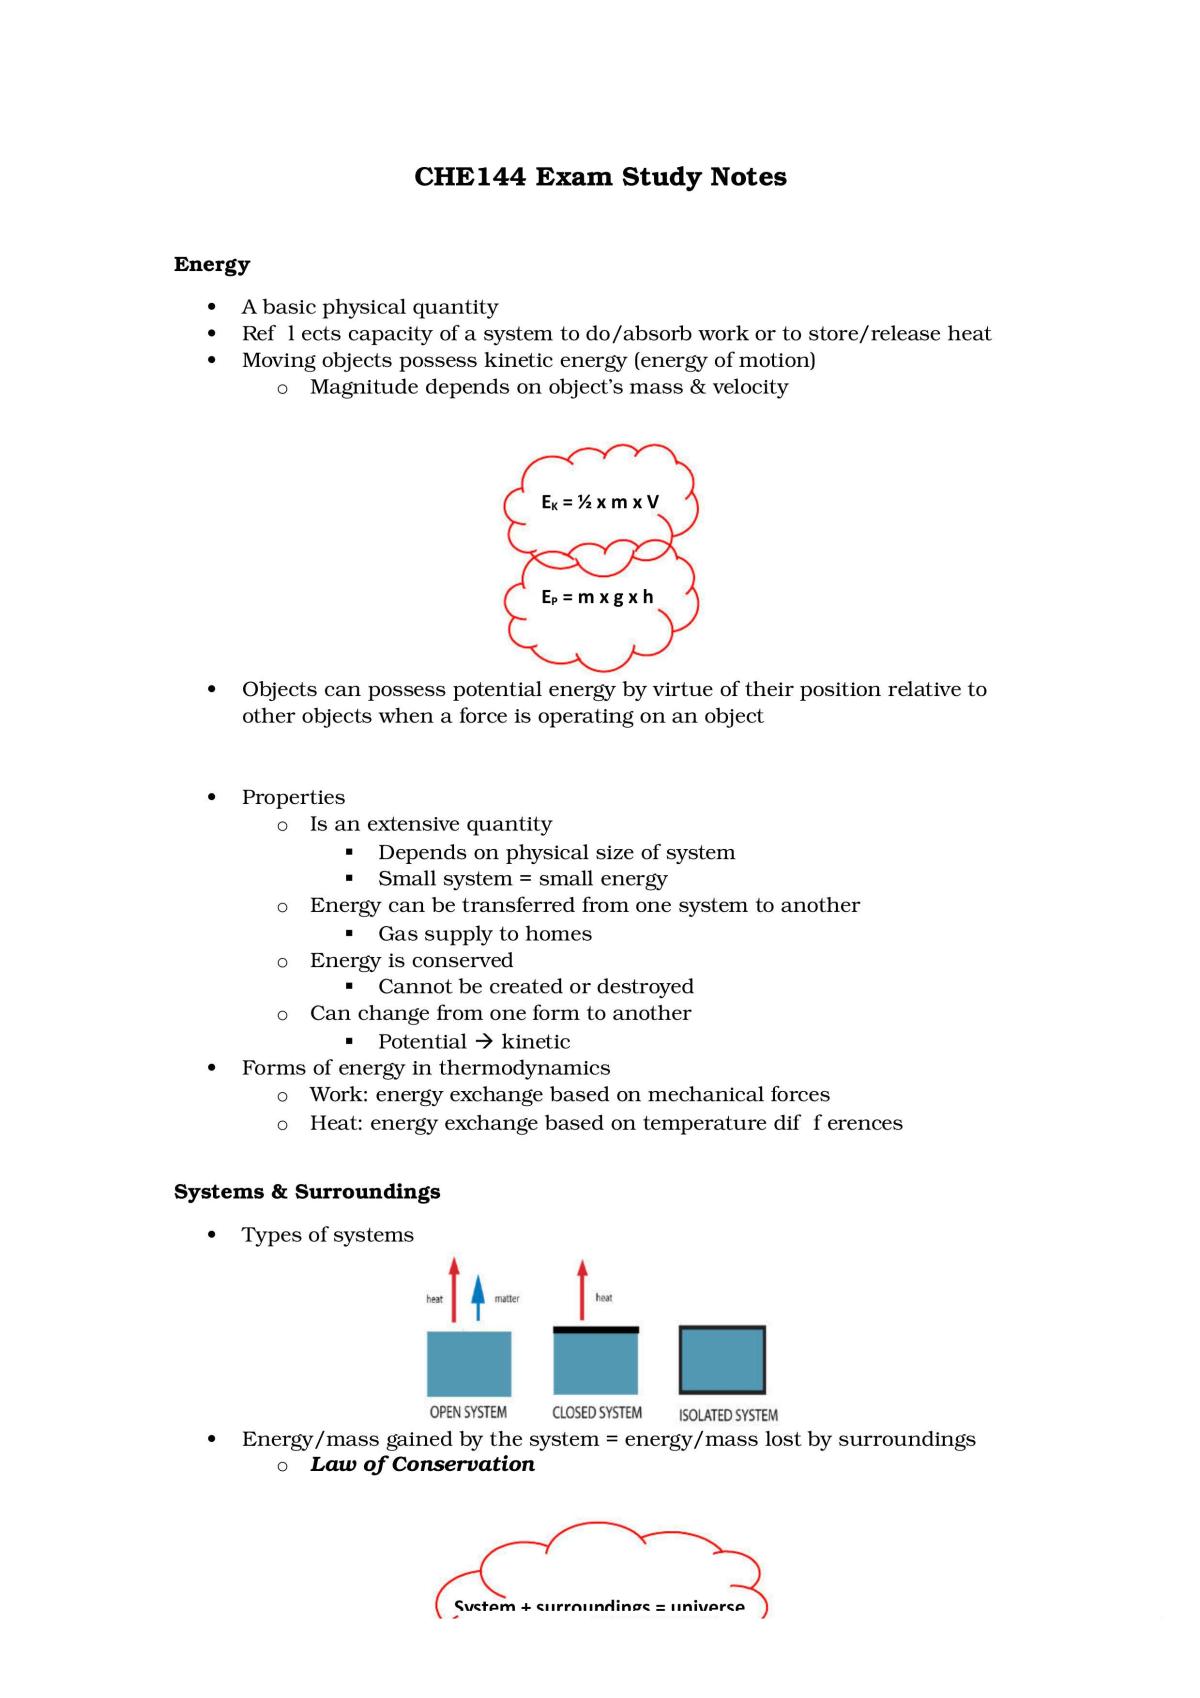 Foundations of Chemistry Exam Study Guide - Page 1